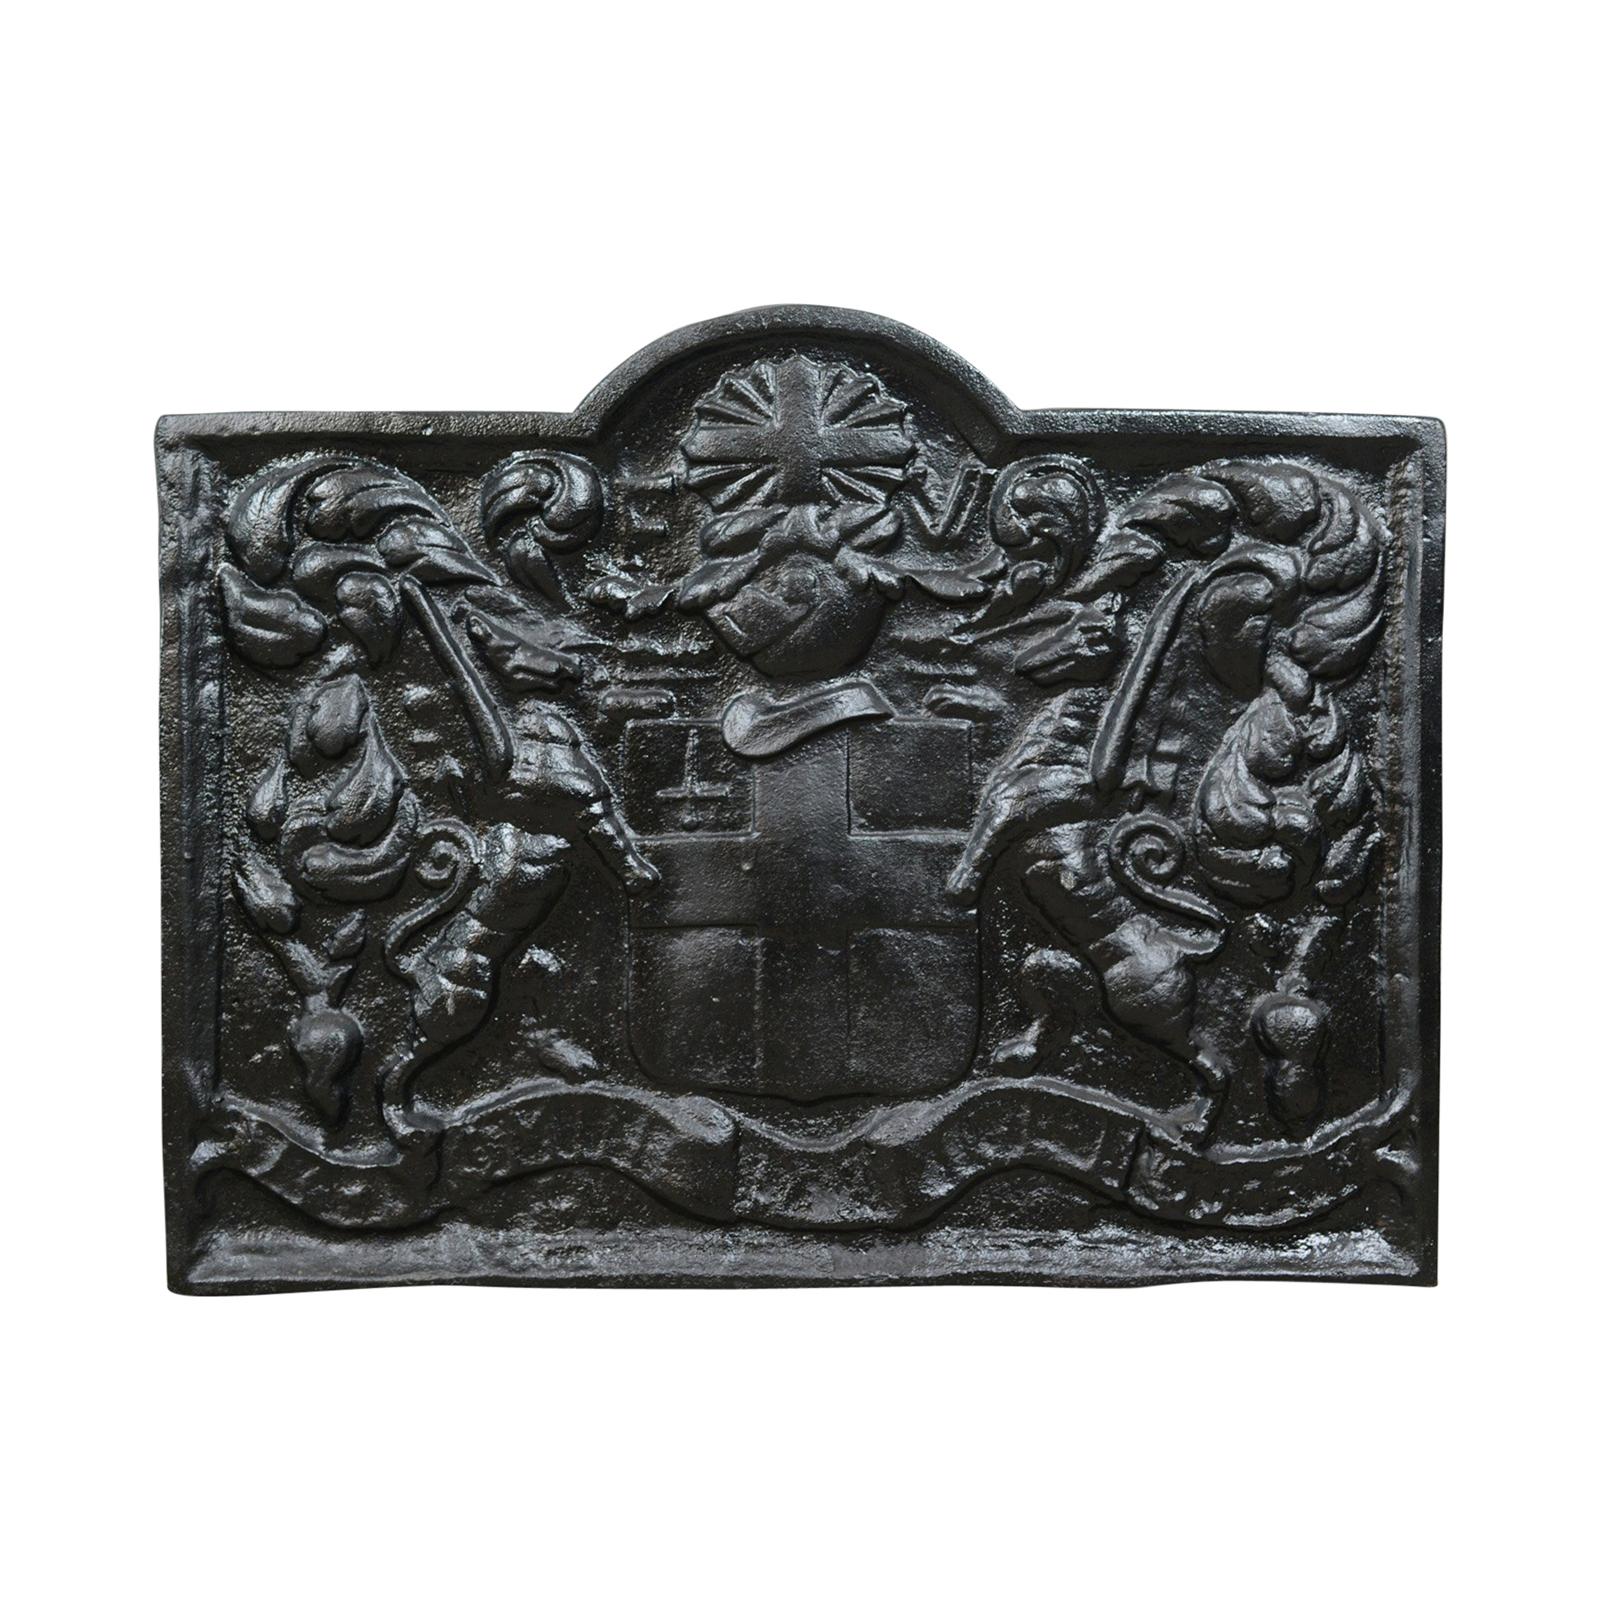 Cast Iron Fire Back, Early 20th Century, Coat of Arms, English, Heavy